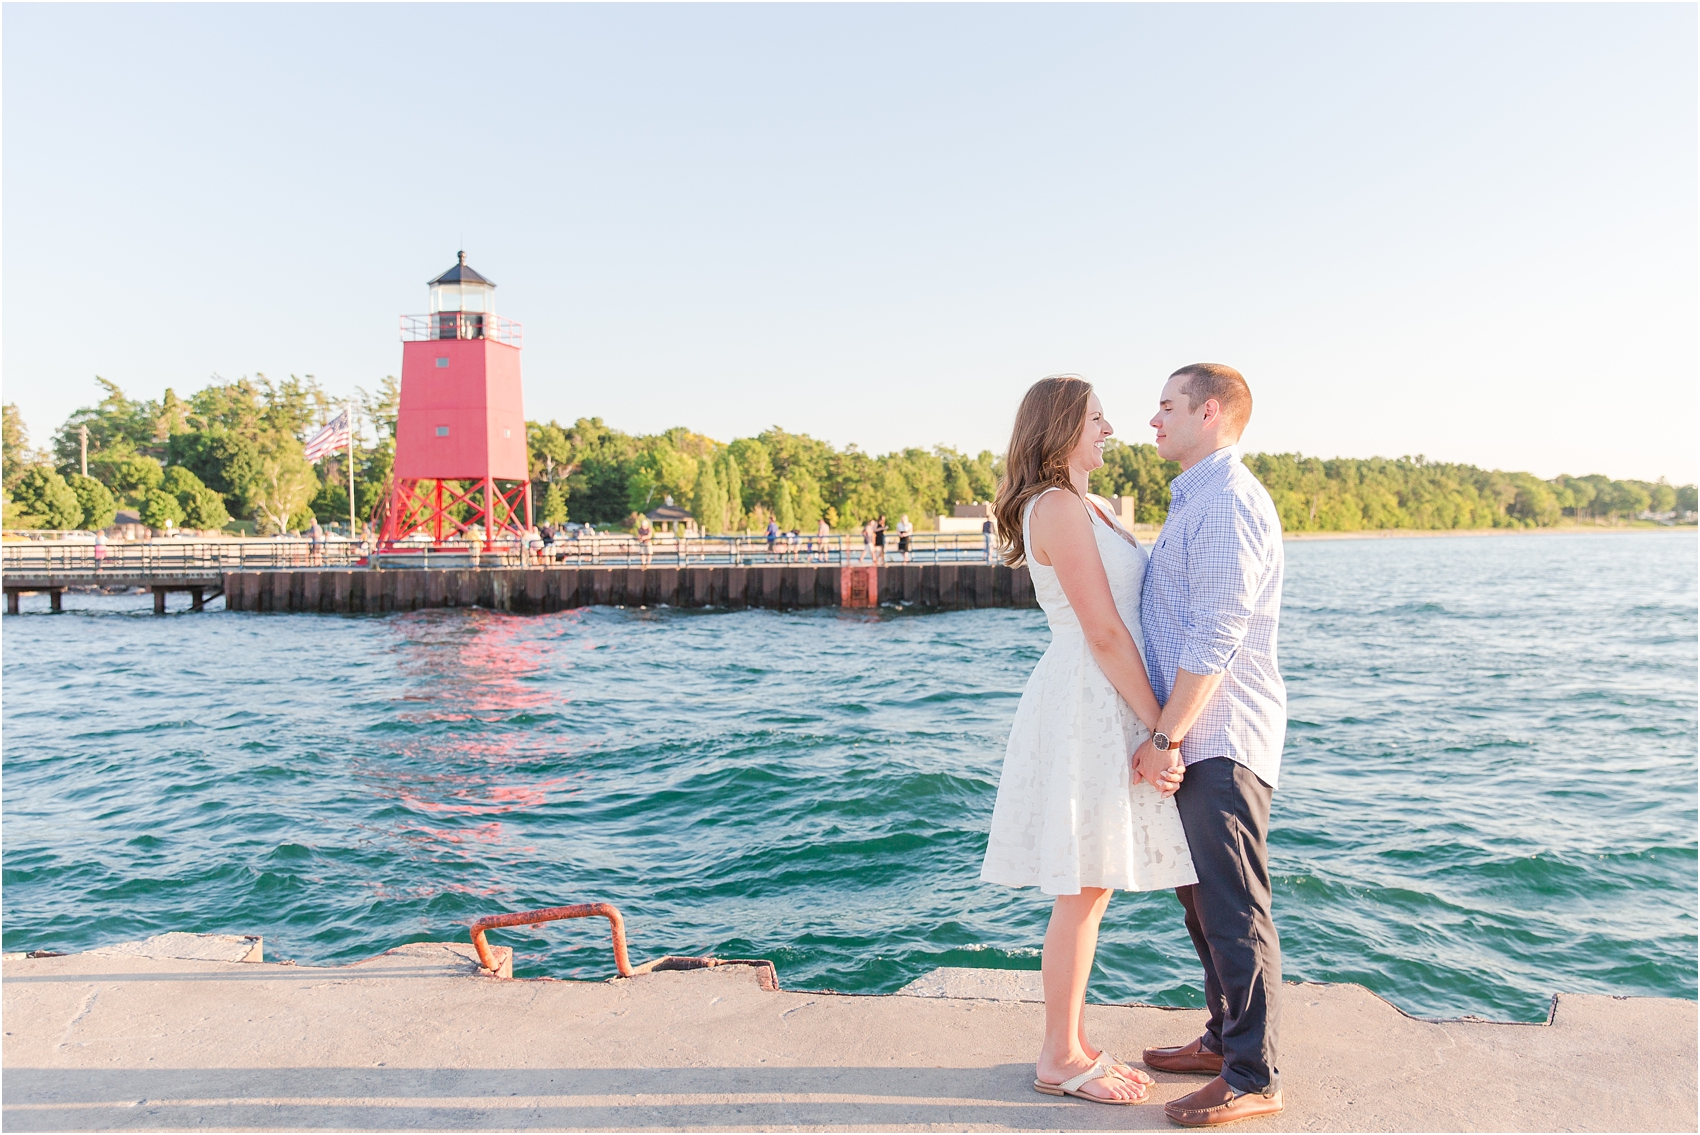 romantic-sunset-engagement-photos-in-downtown-charlevoix-mi-by-courtney-carolyn-photography_0001.jpg